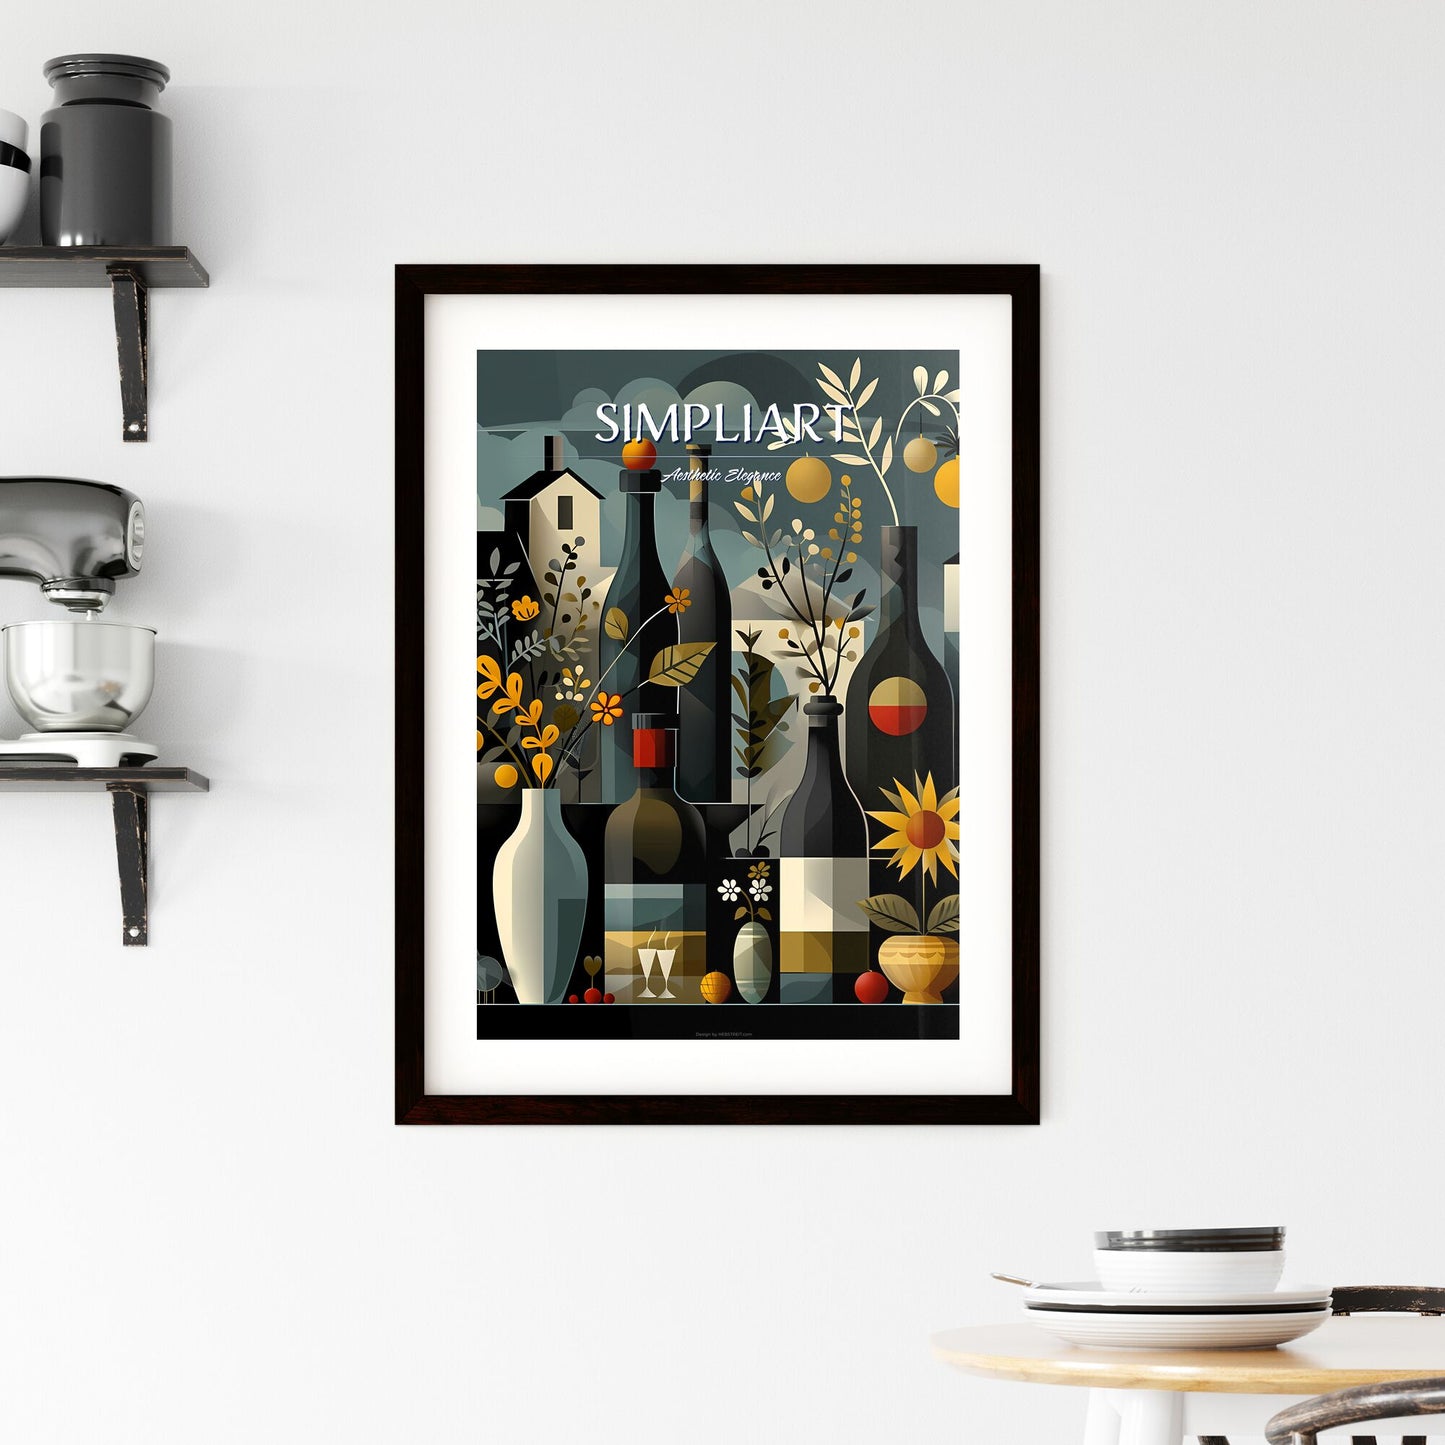 A Poster of art deco minimalism - A Group Of Bottles And Vases With Flowers Default Title